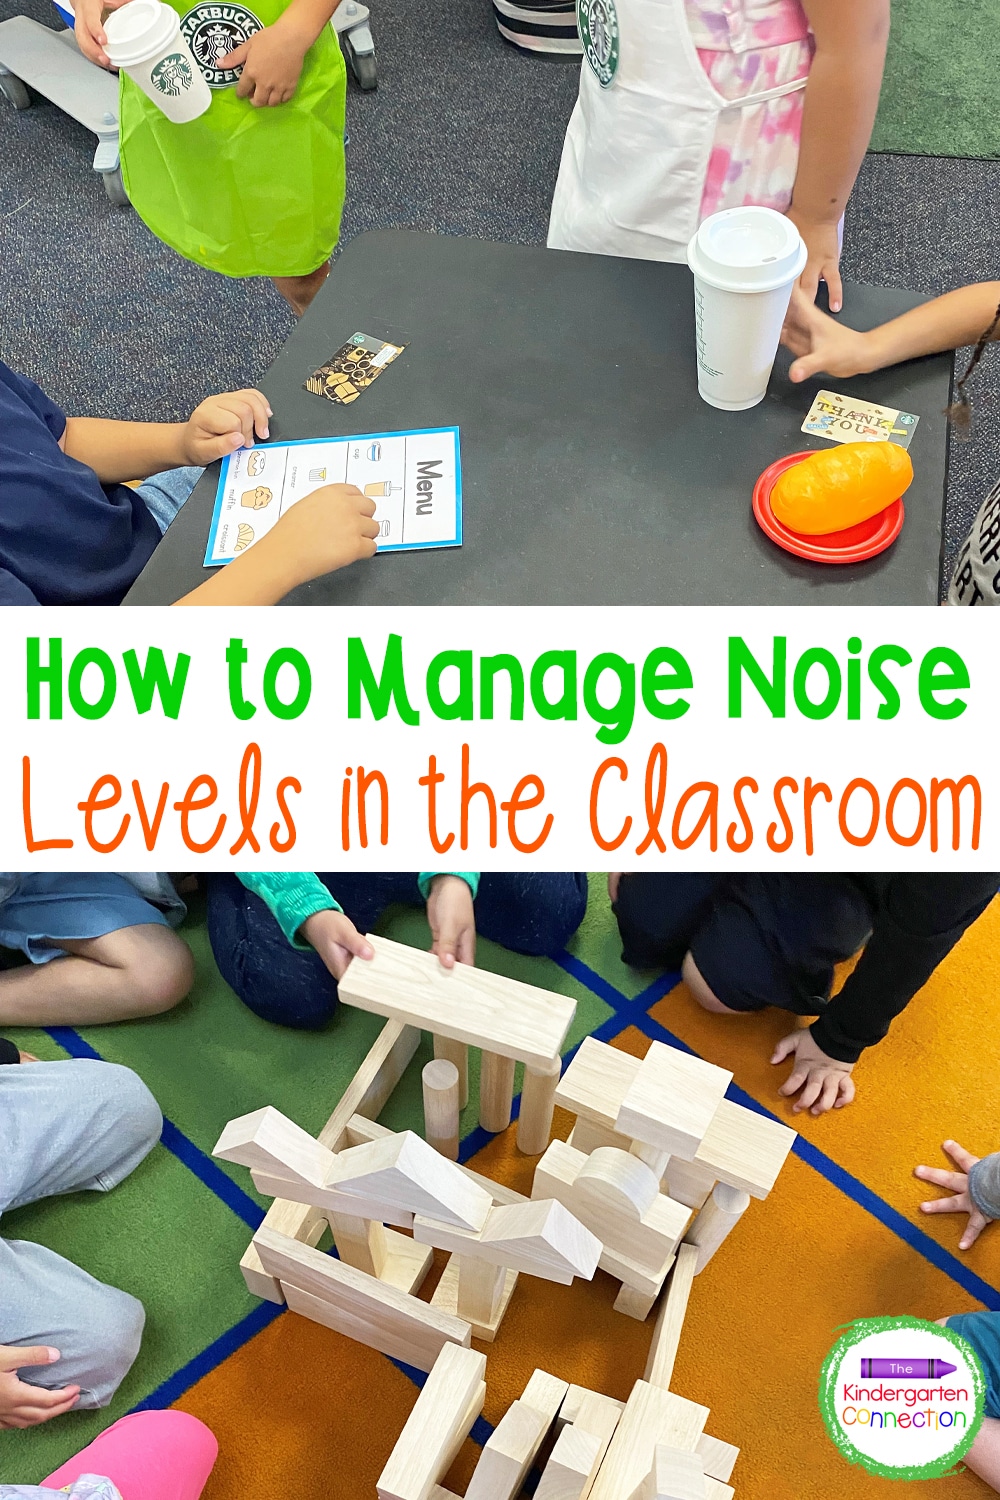 Easy Teacher Tips for Managing Noise Levels in the Classroom